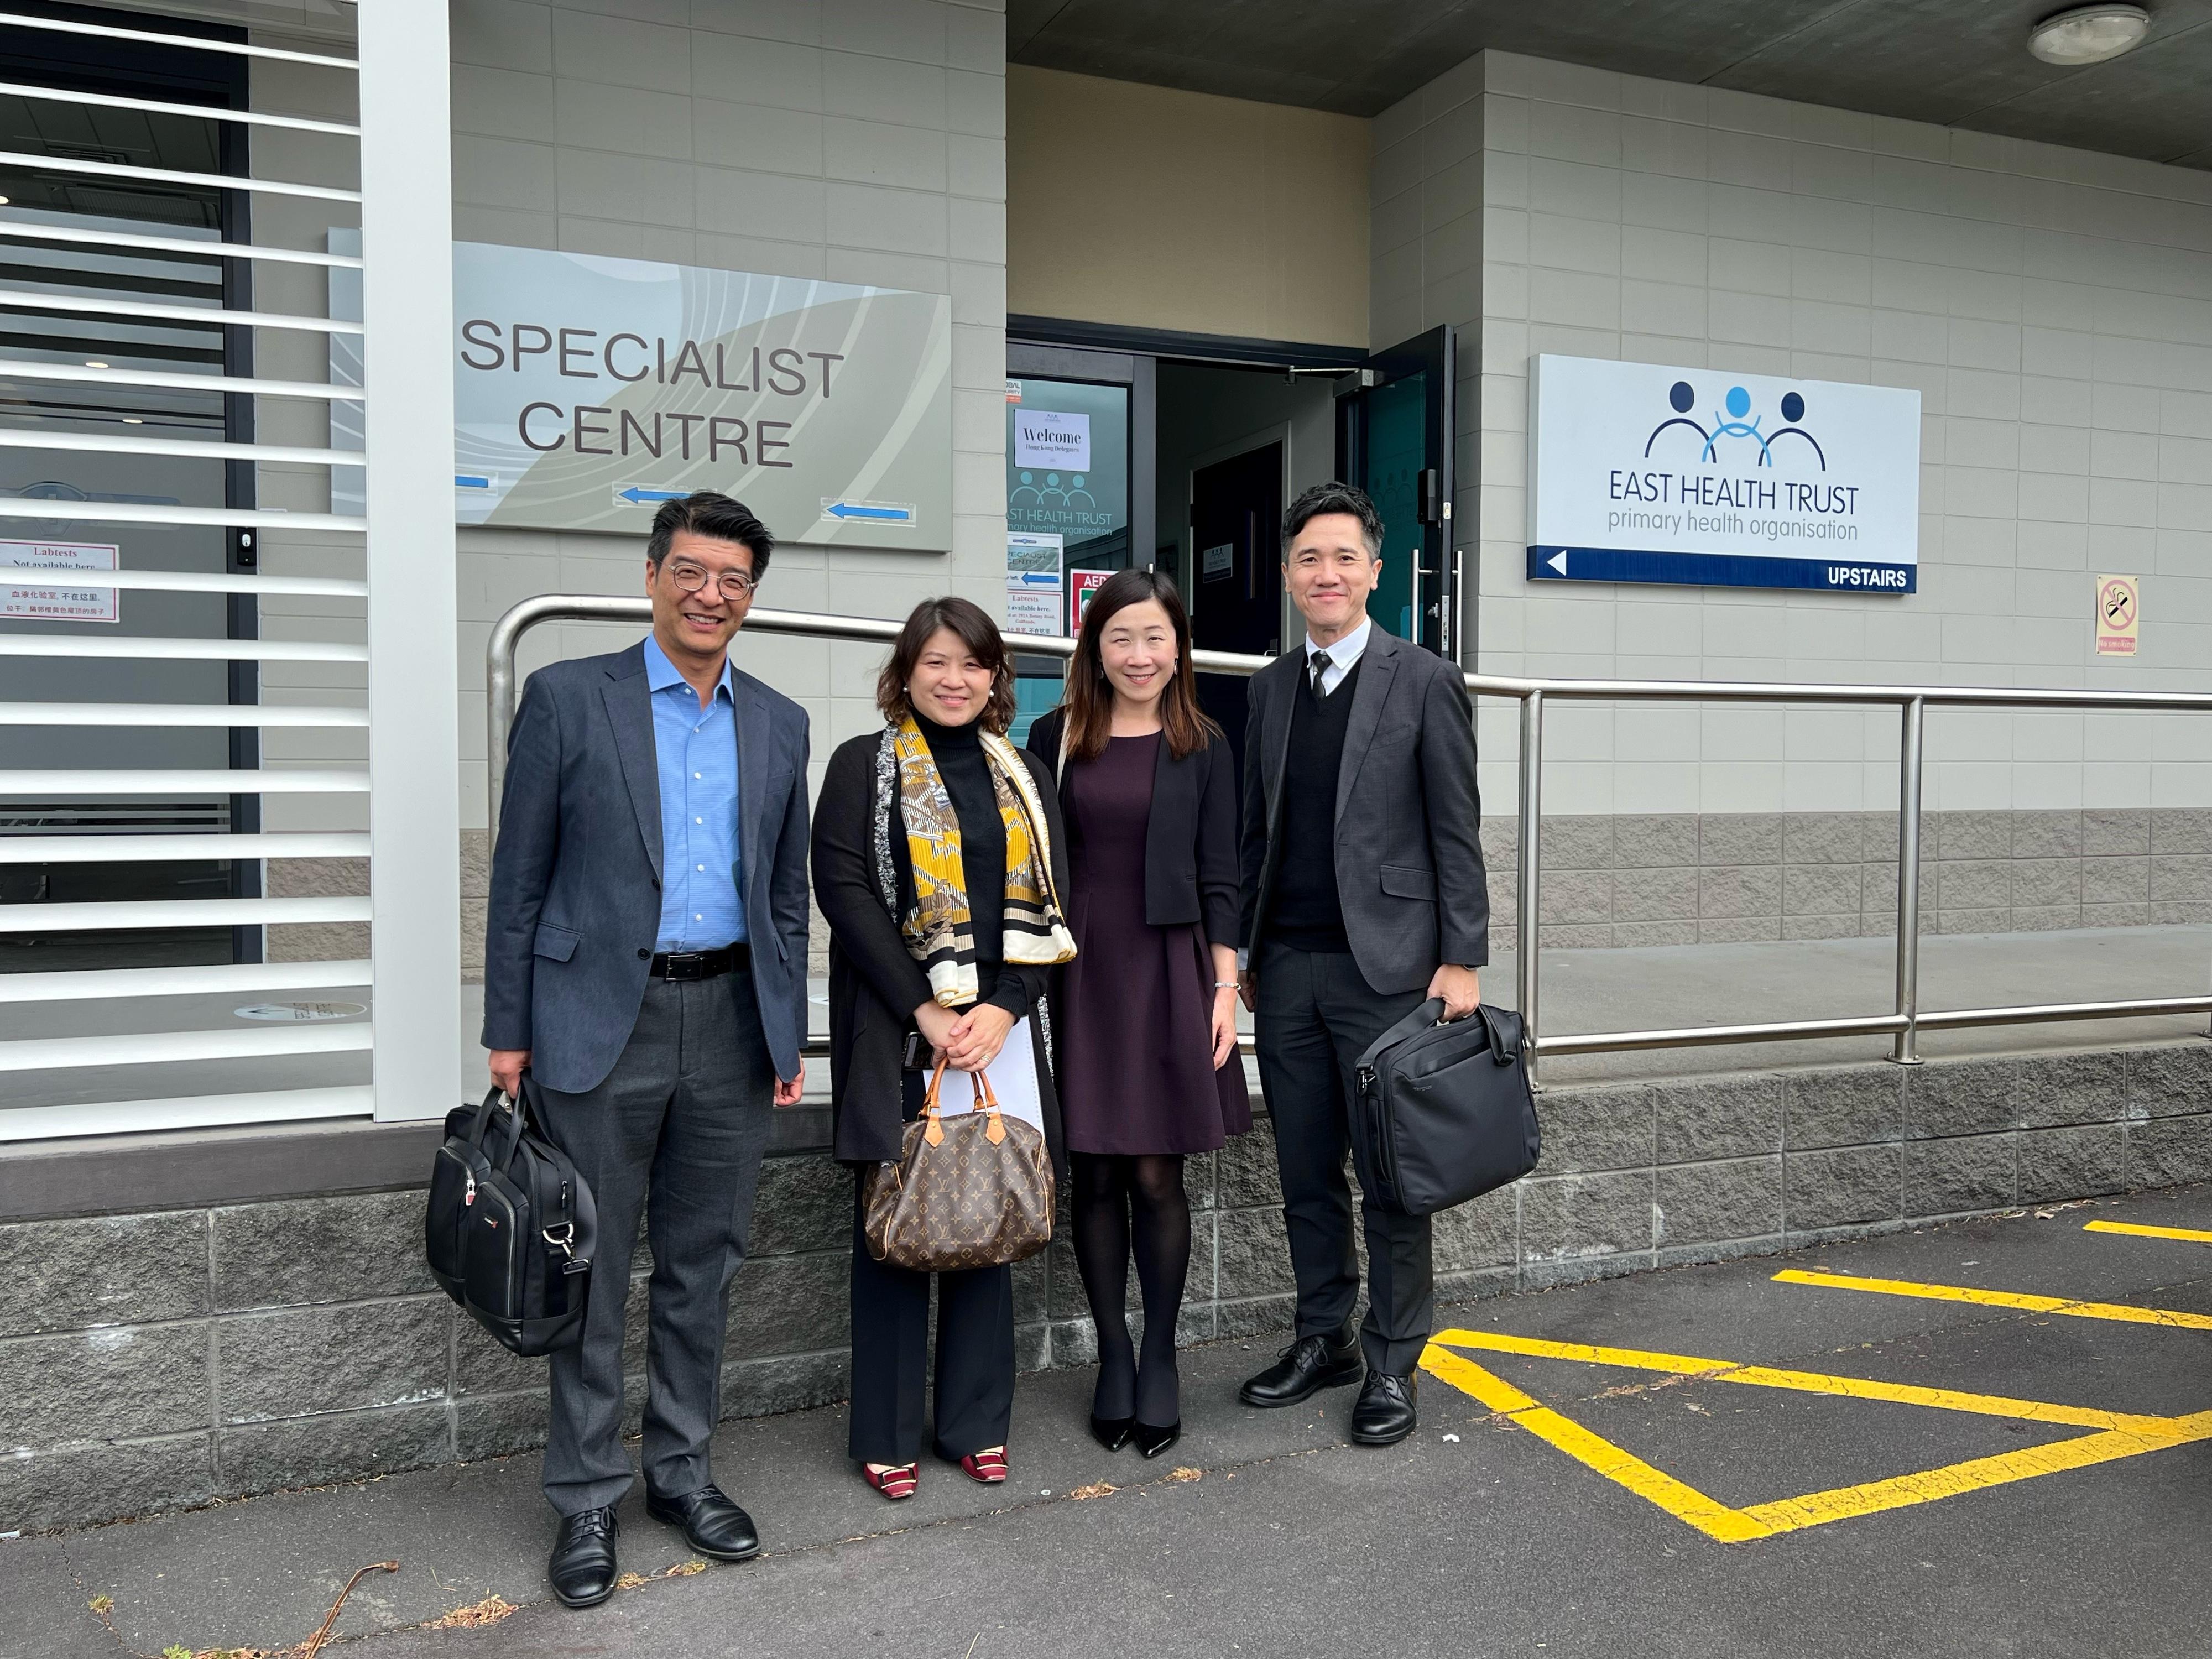 Accompanied by the Director of the Hong Kong Economic and Trade Office, Sydney, Miss Trista Lim (second right), the Under Secretary for Health, Dr Libby Lee (second left); the Commissioner for Primary Healthcare, Dr Pang Fei-chau (first left); and Assistant Commissioner for Primary Healthcare Dr Tony Ha (first right) visited the East Health Trust Primary Health Organisation on October 10 (Auckland time) in Auckland, New Zealand, to get a better grasp on its approach of providing primary healthcare services.